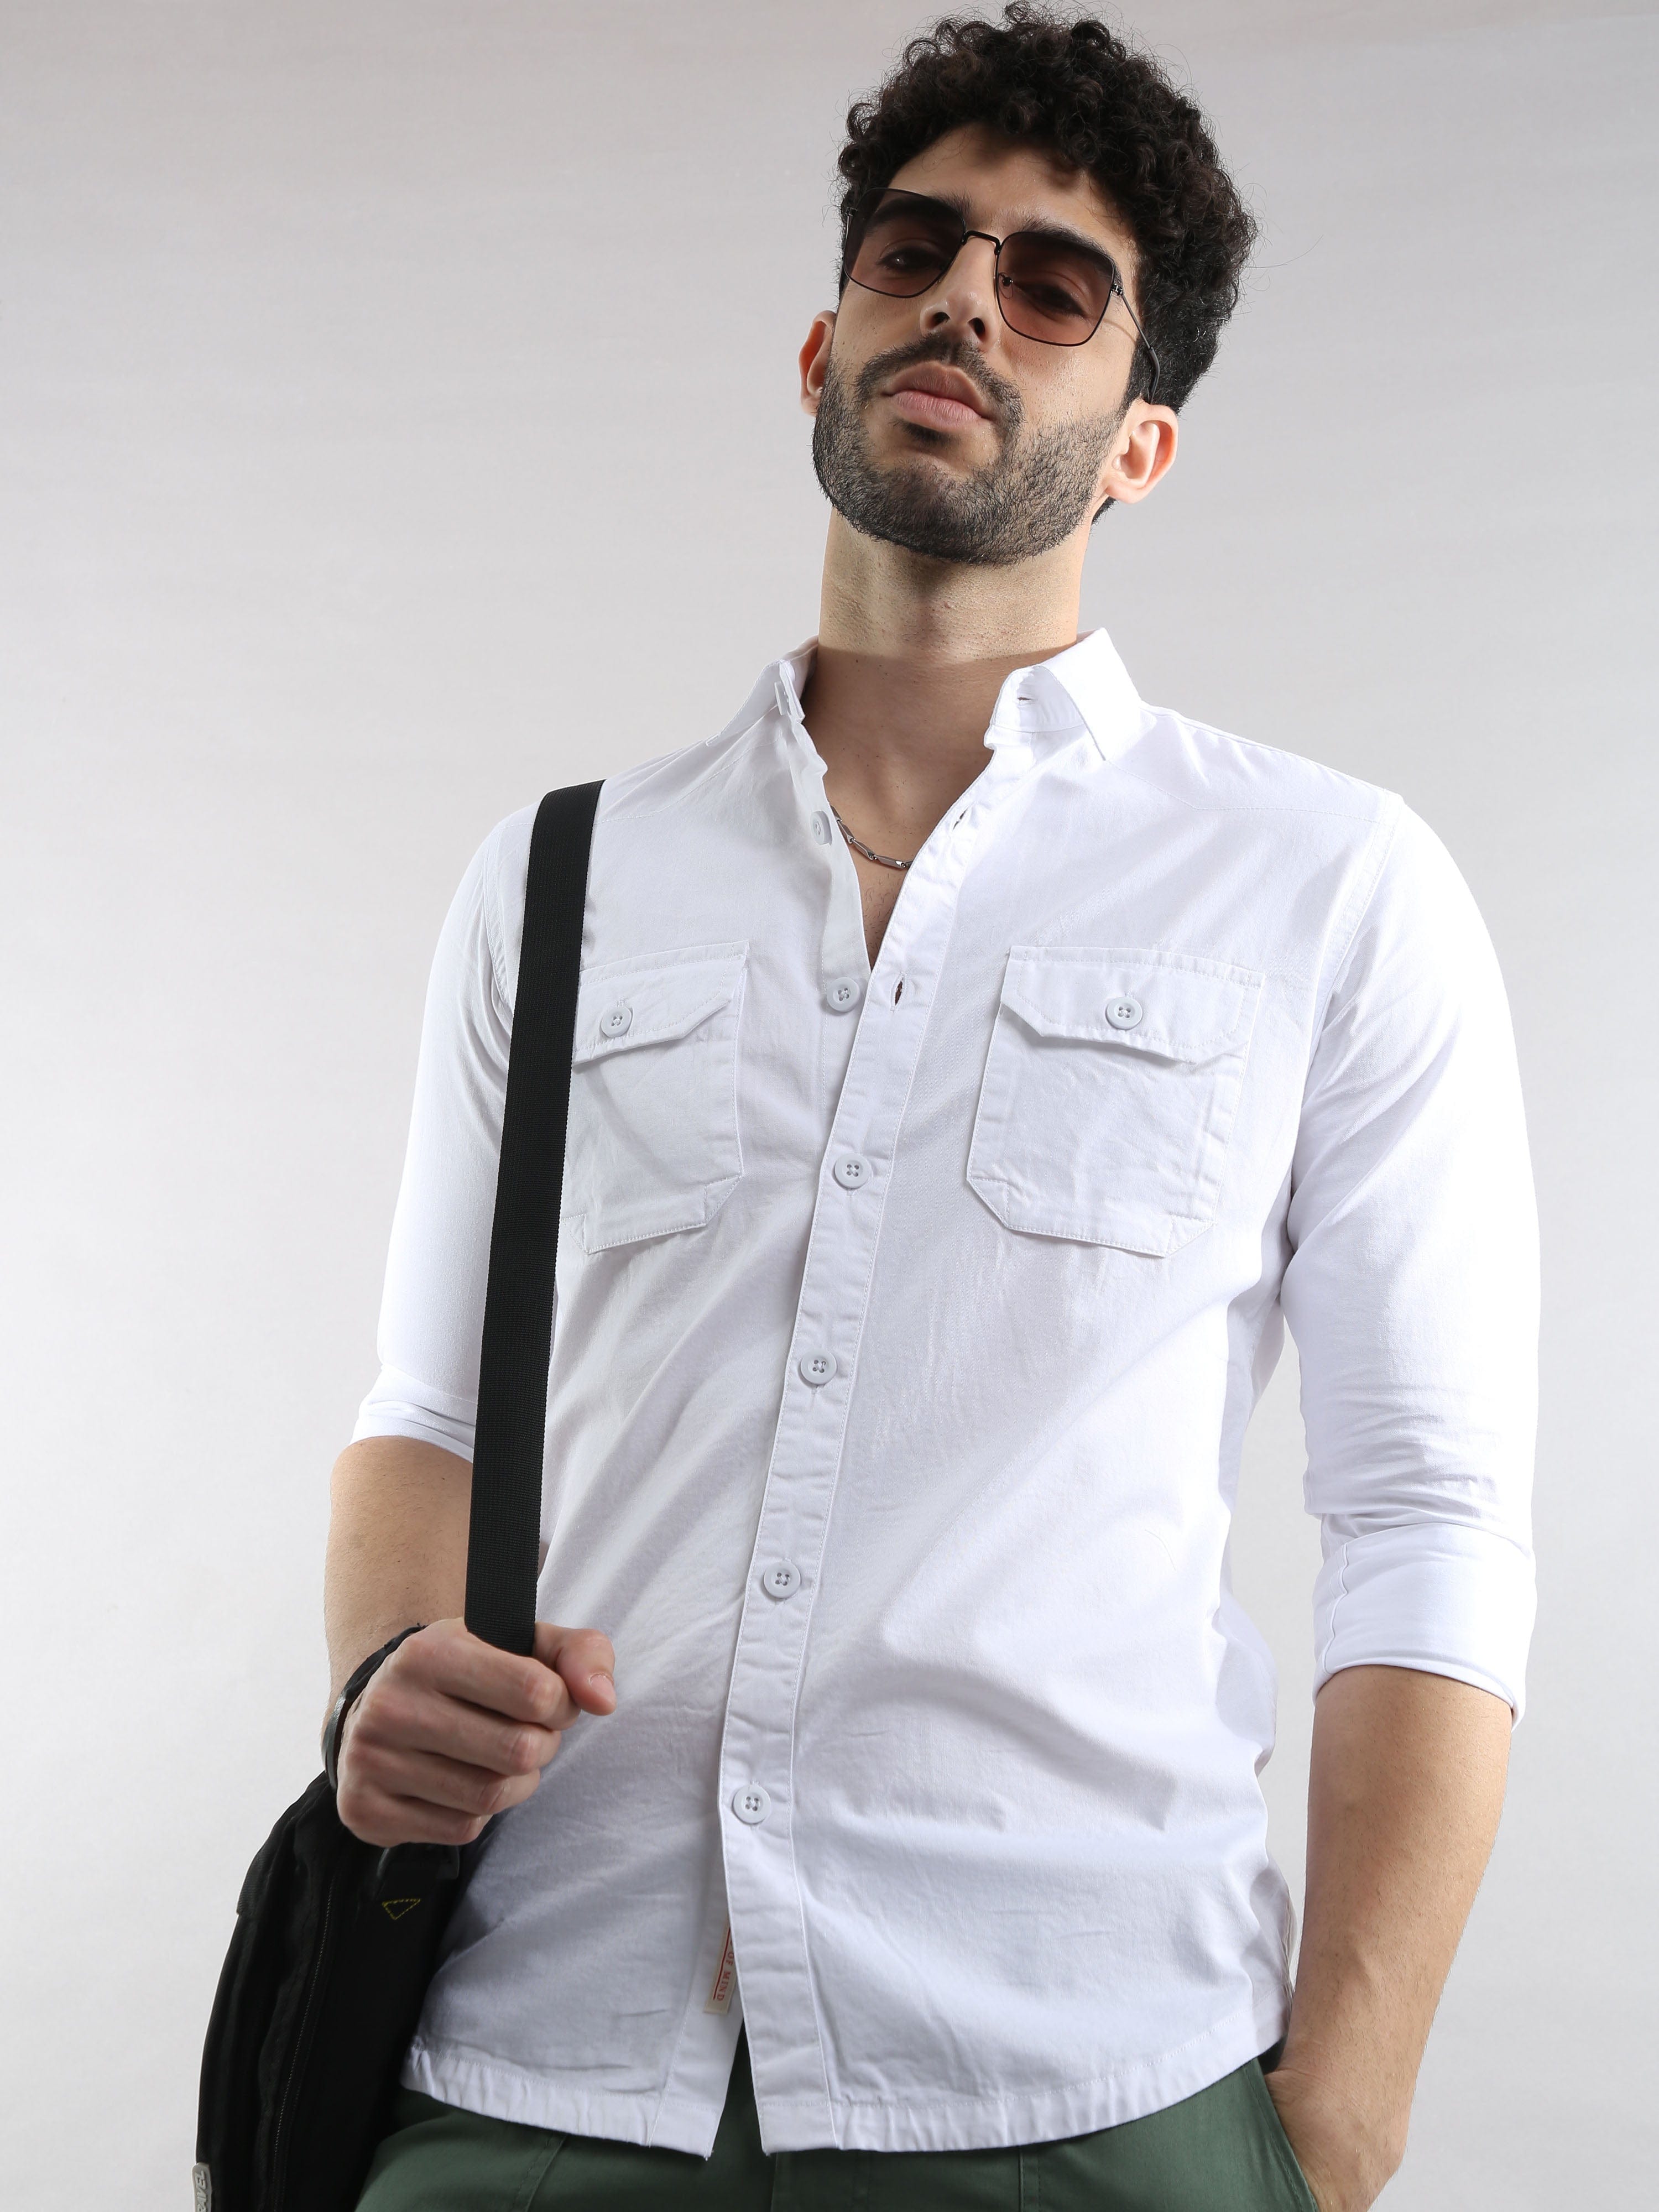 Buy White Cotton Double Pocket Shirt Online At Great PriceRs. 1349.00